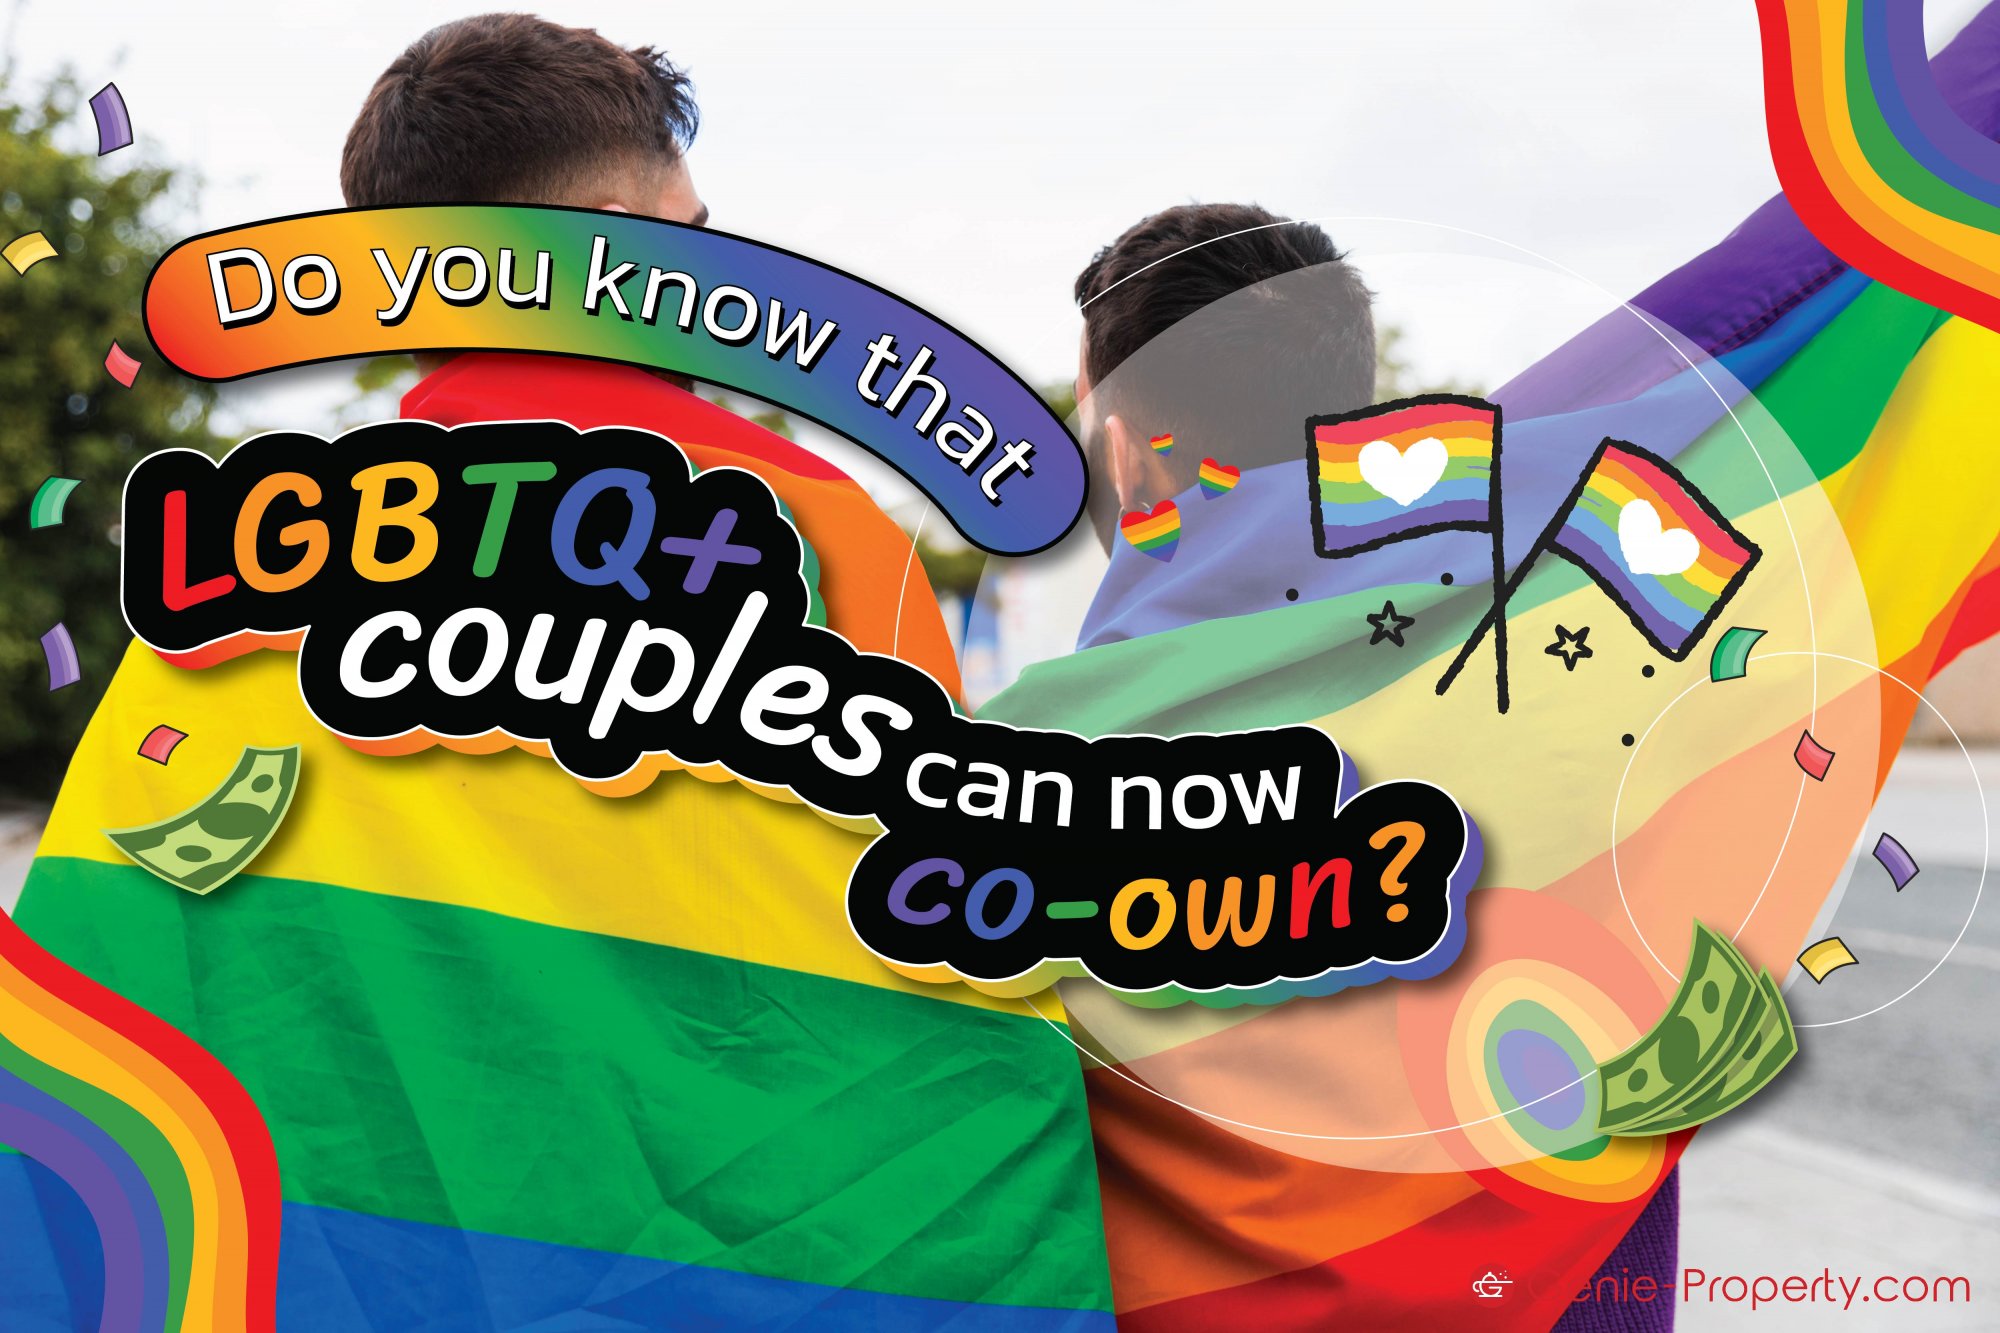 image for LGBTQ+ couples can now co-own?